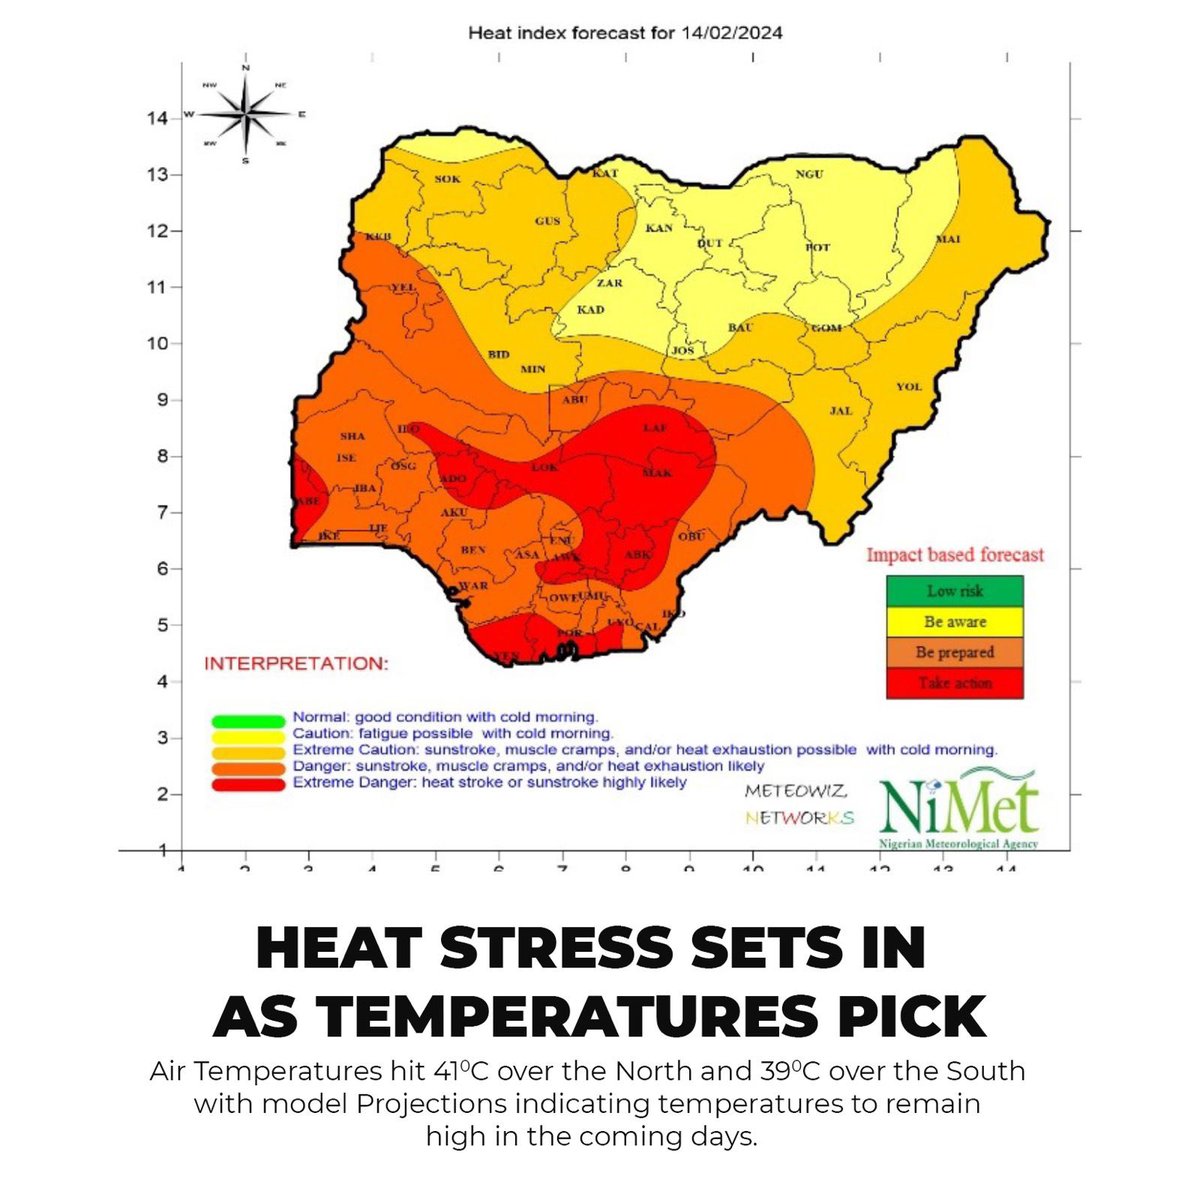 Air Temperatures hit 41°C over the North and 39°C over the South with model Projections indicating temperatures to remain high in the coming days IMPLICATIONS: Dehydration: this could also cause fainting; chicken Pox disease, Measles, Heat Rash,